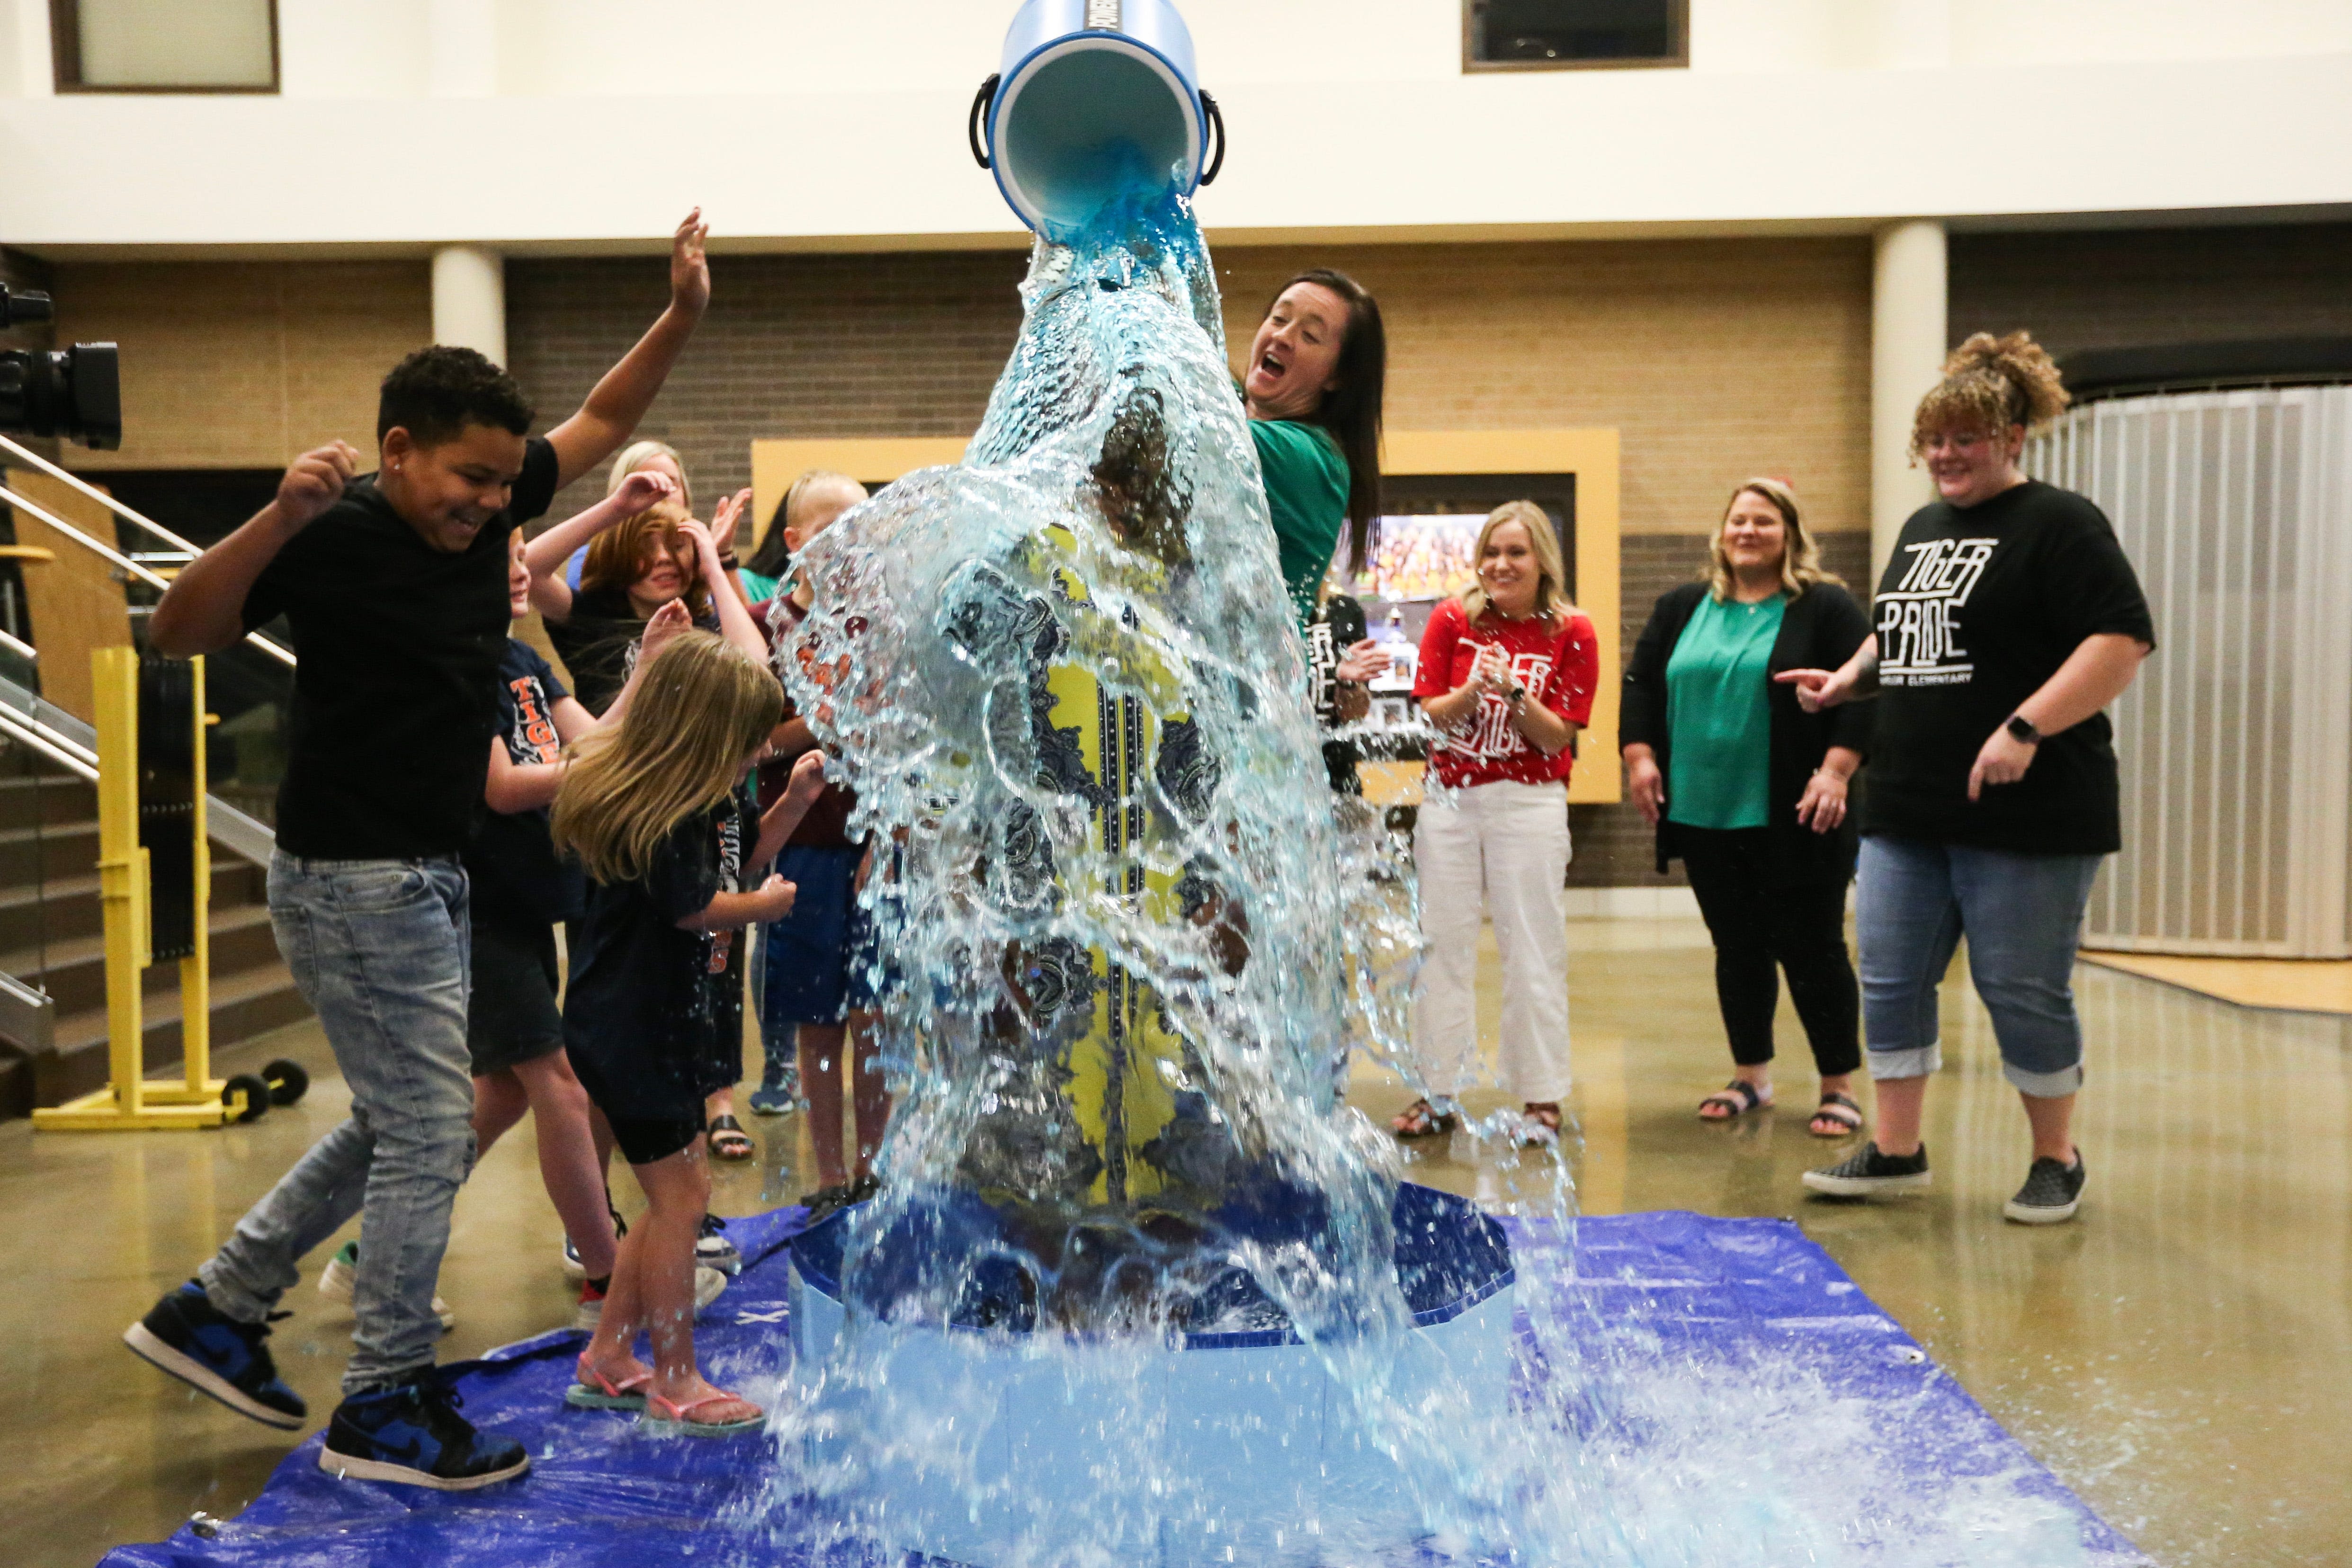 SPS superintendent celebrates higher attendance with a soaking, issues literacy challenge